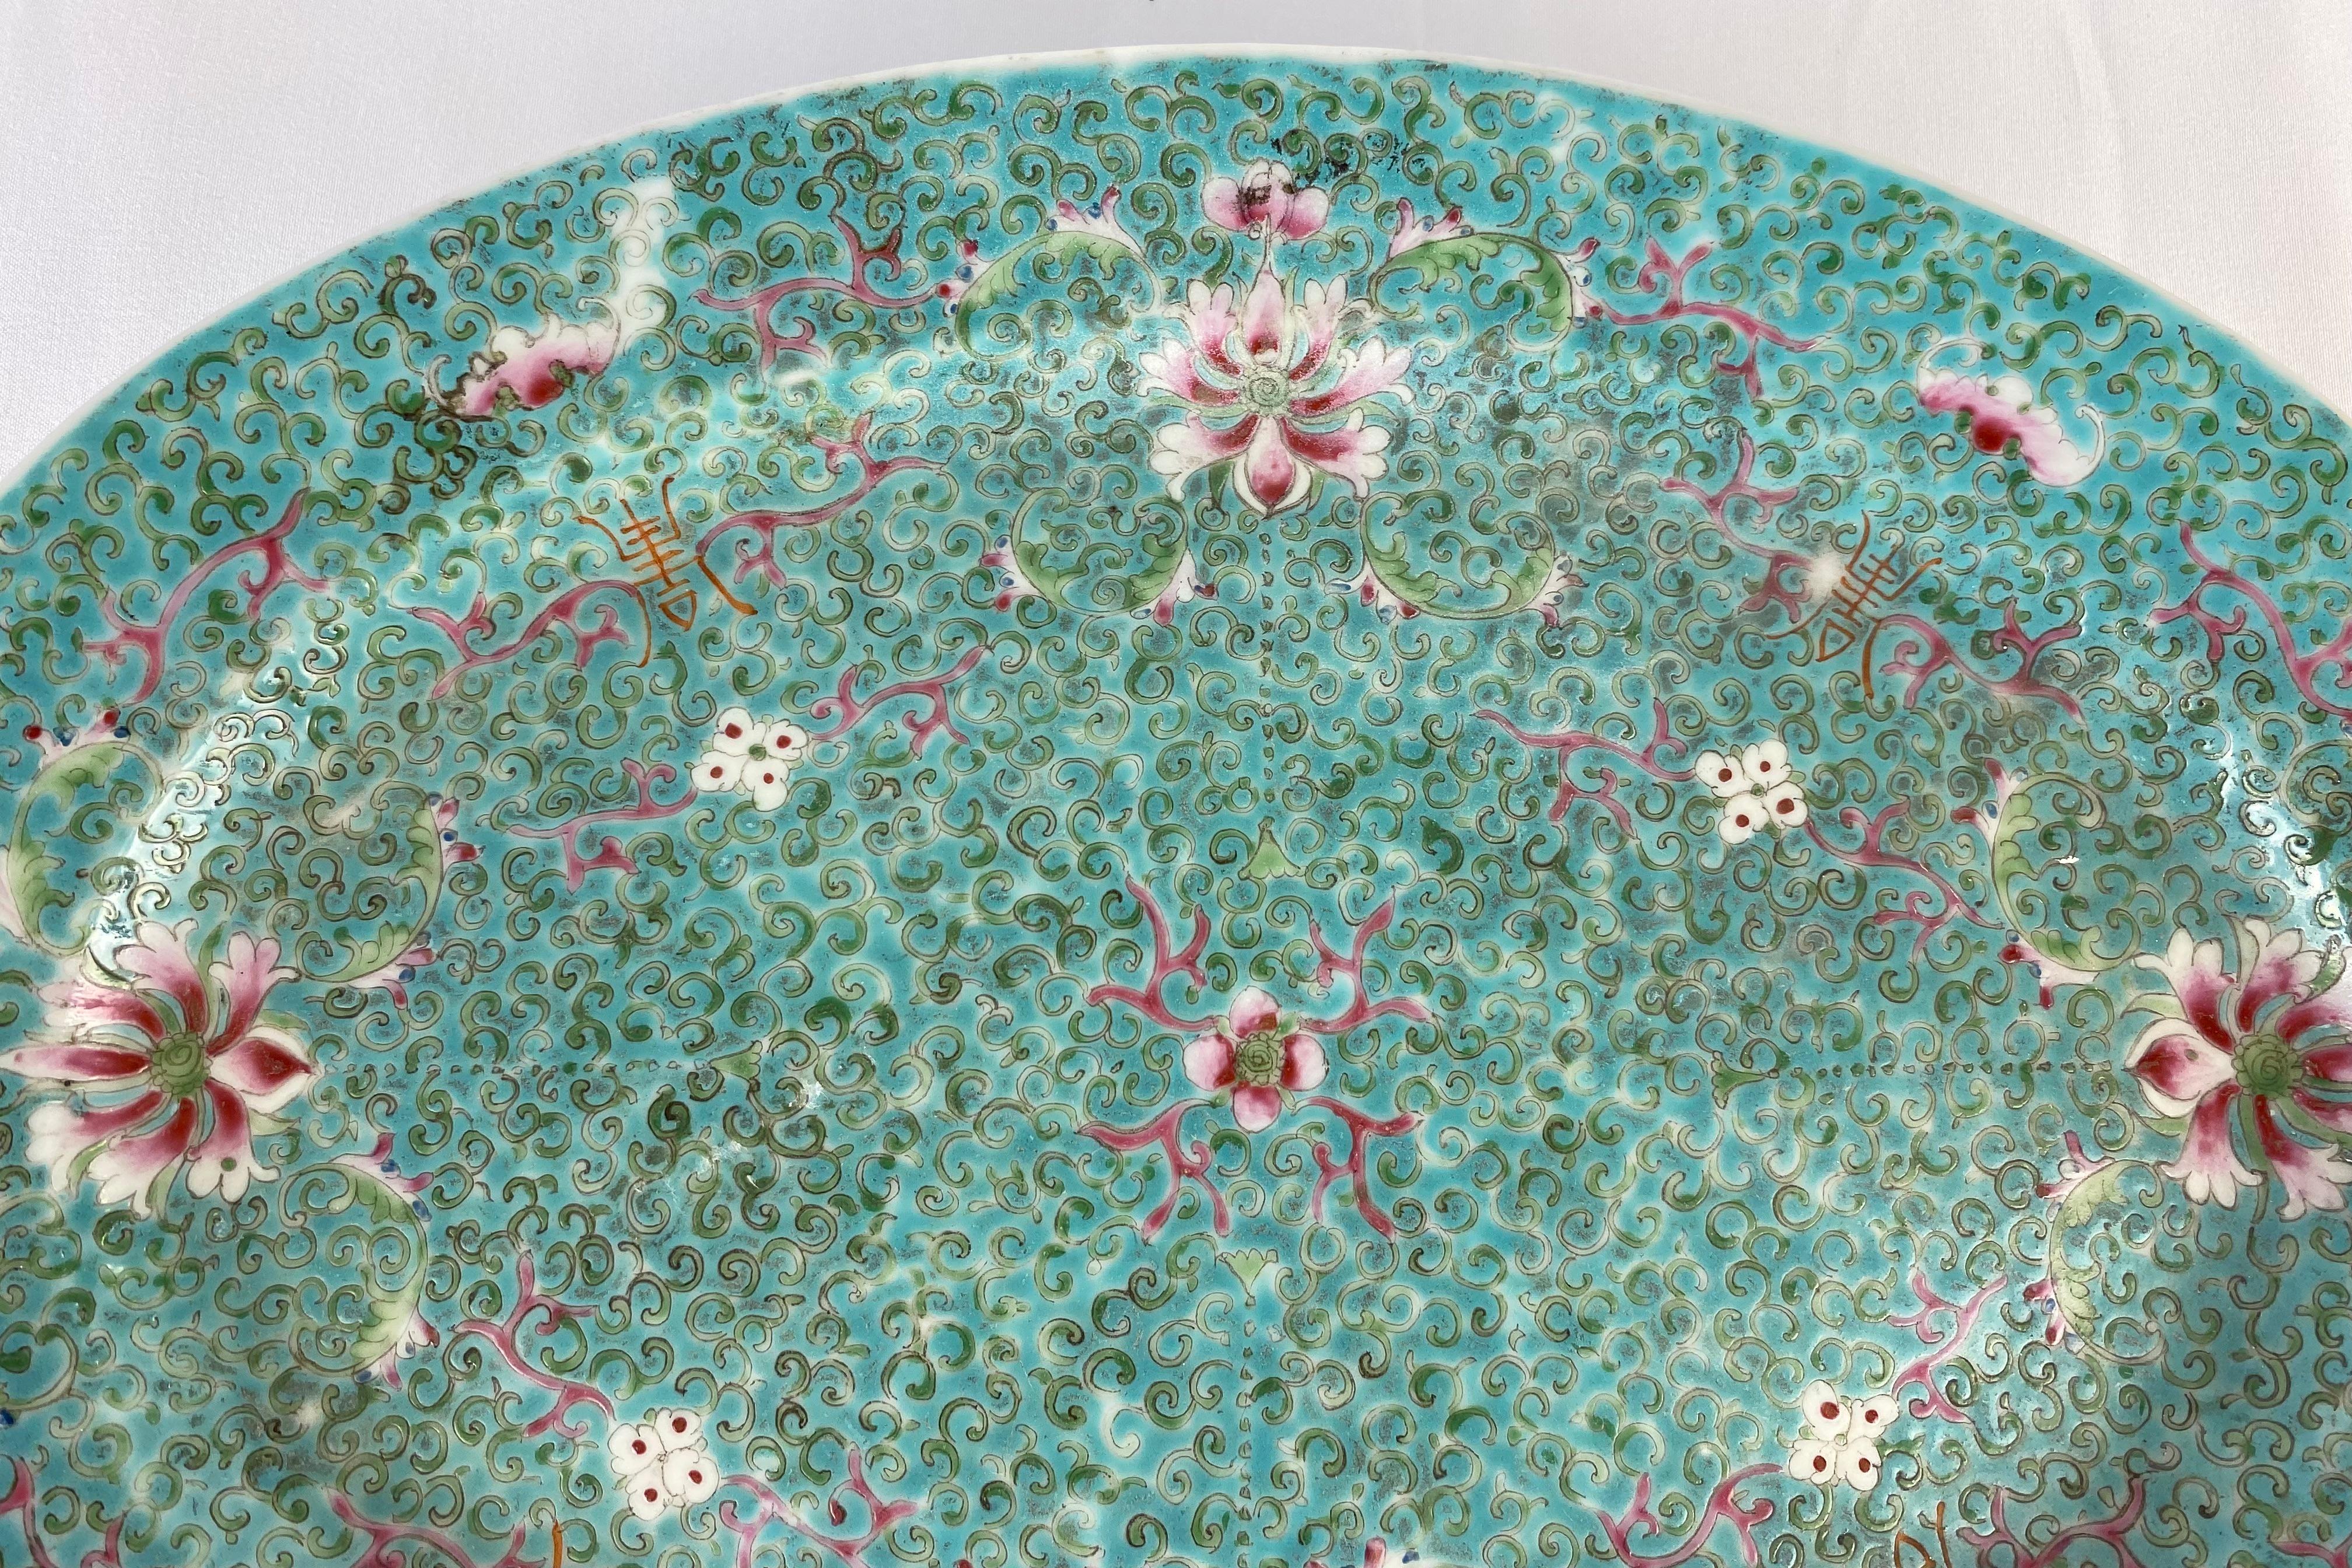 An exquisite Art Deco period Chinese Famille Rose porcelain bowl or small platter hand-painted and featuring over-glaze enamels. The strong color palette and rich decoration are hallmarks of Chinese export hunt bowls of the 18th century. 

The shape